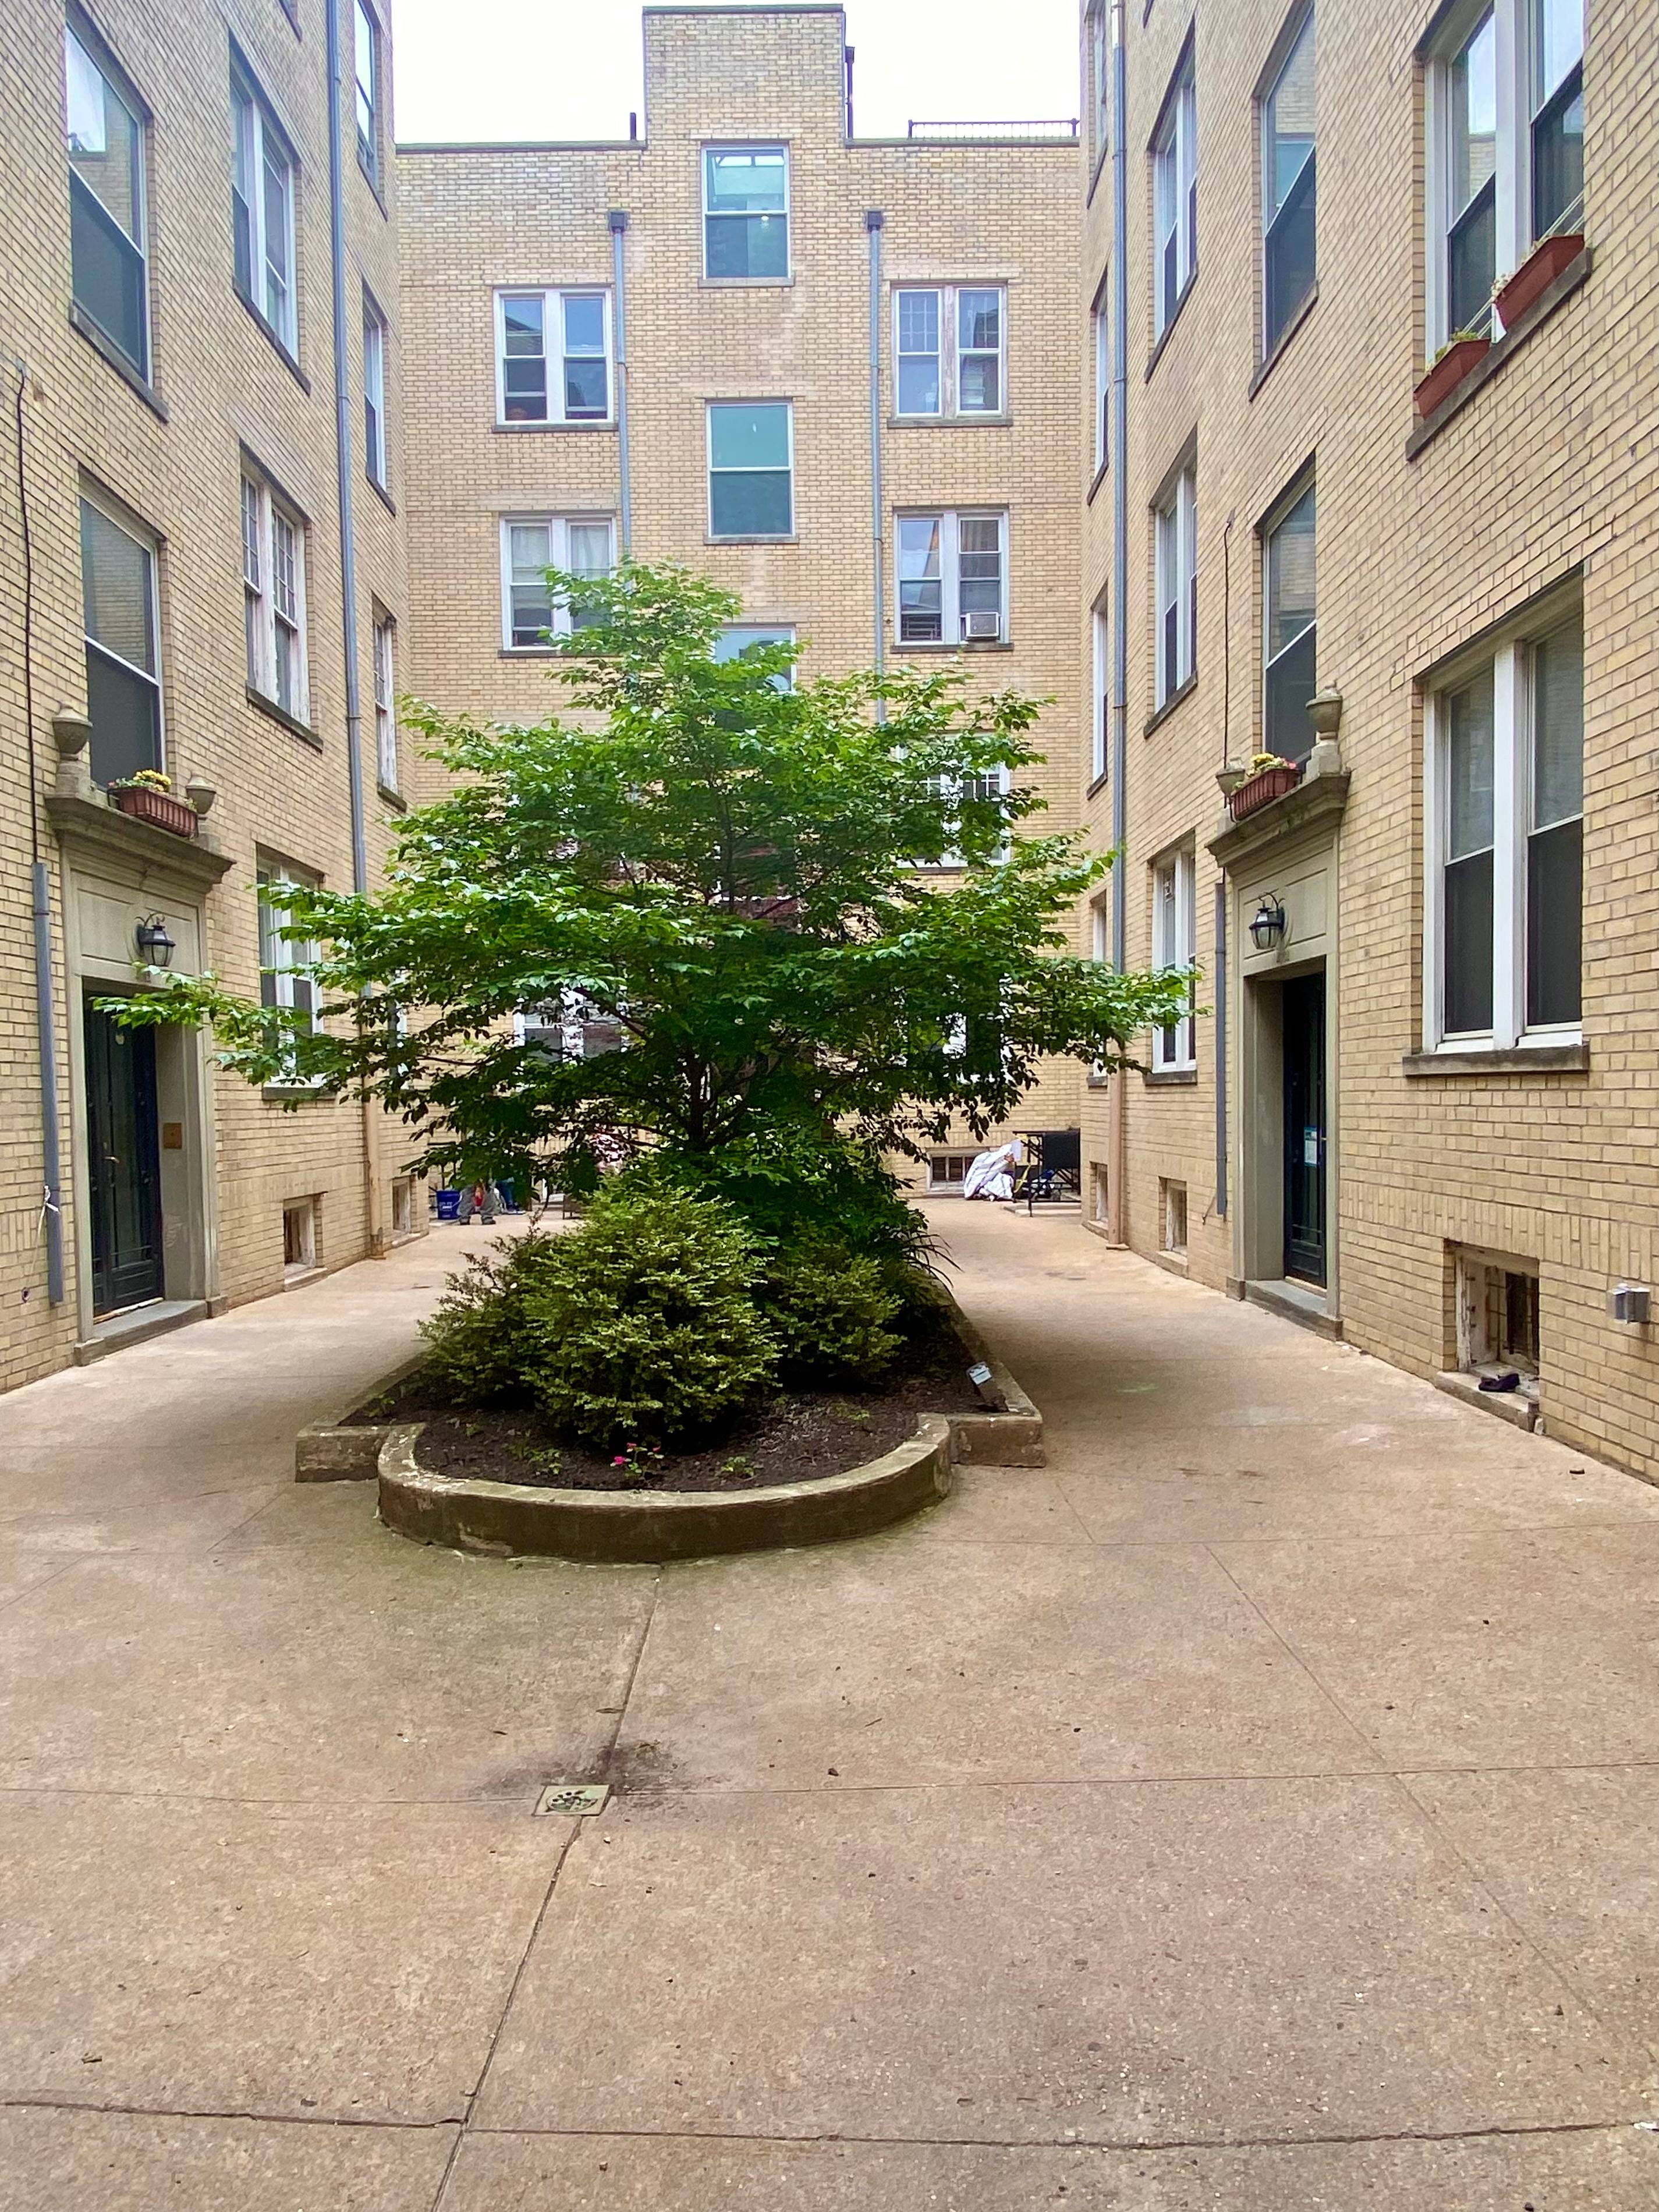 OPEN HOUSE 7 11 FROM 1 30 2 30 BY APPOINTMENT ONLY Located only a block away from the soccer fields, swimming pool, and running paths of Brooklyn s iconic ...